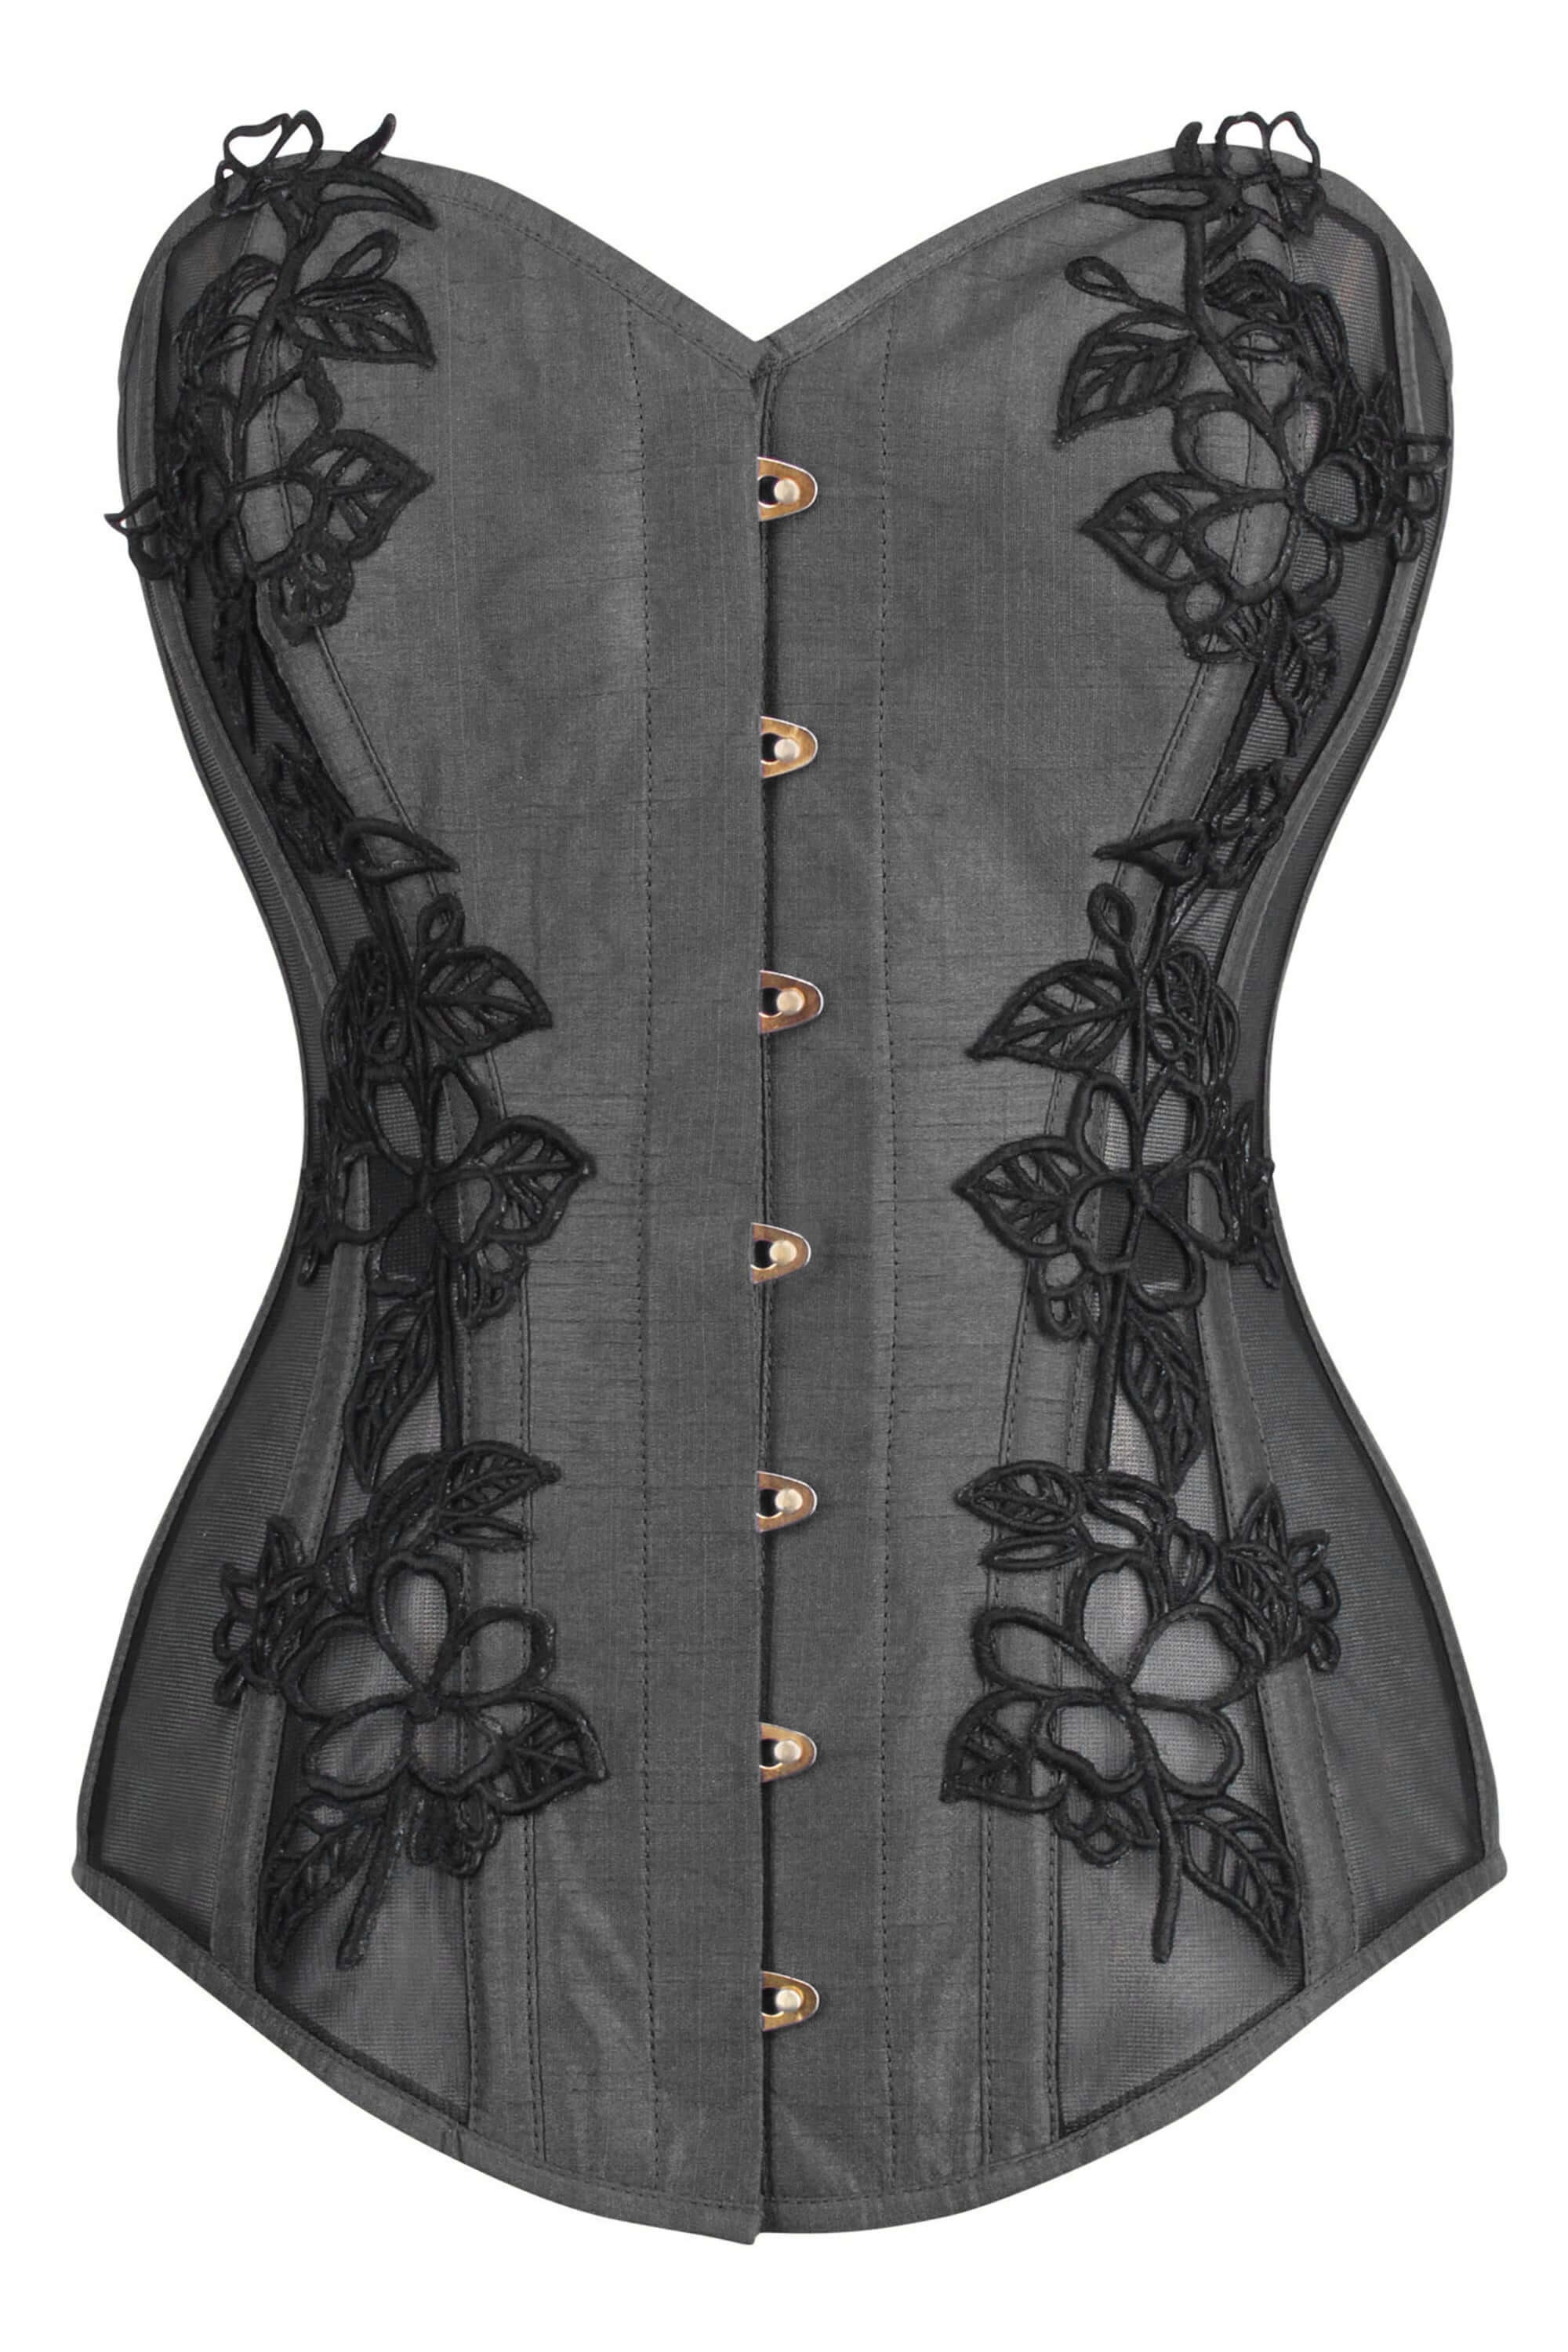 Black Mesh Fan Laced Underbust Corset ~ Pip and Pantalaimon – Pip